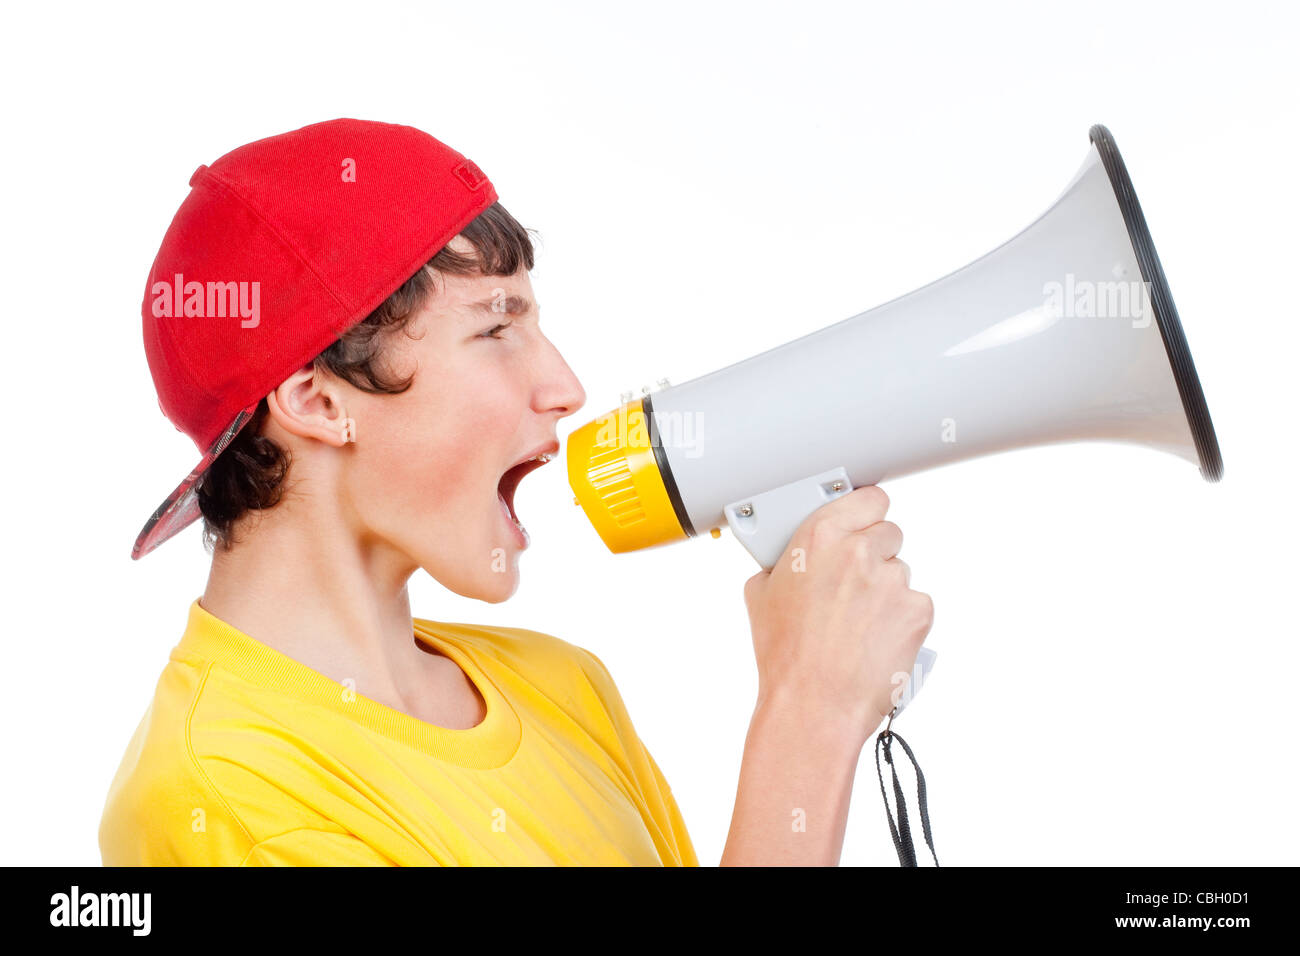 teenage boy in red baseball cap shouting in megaphone -isolated on white Stock Photo